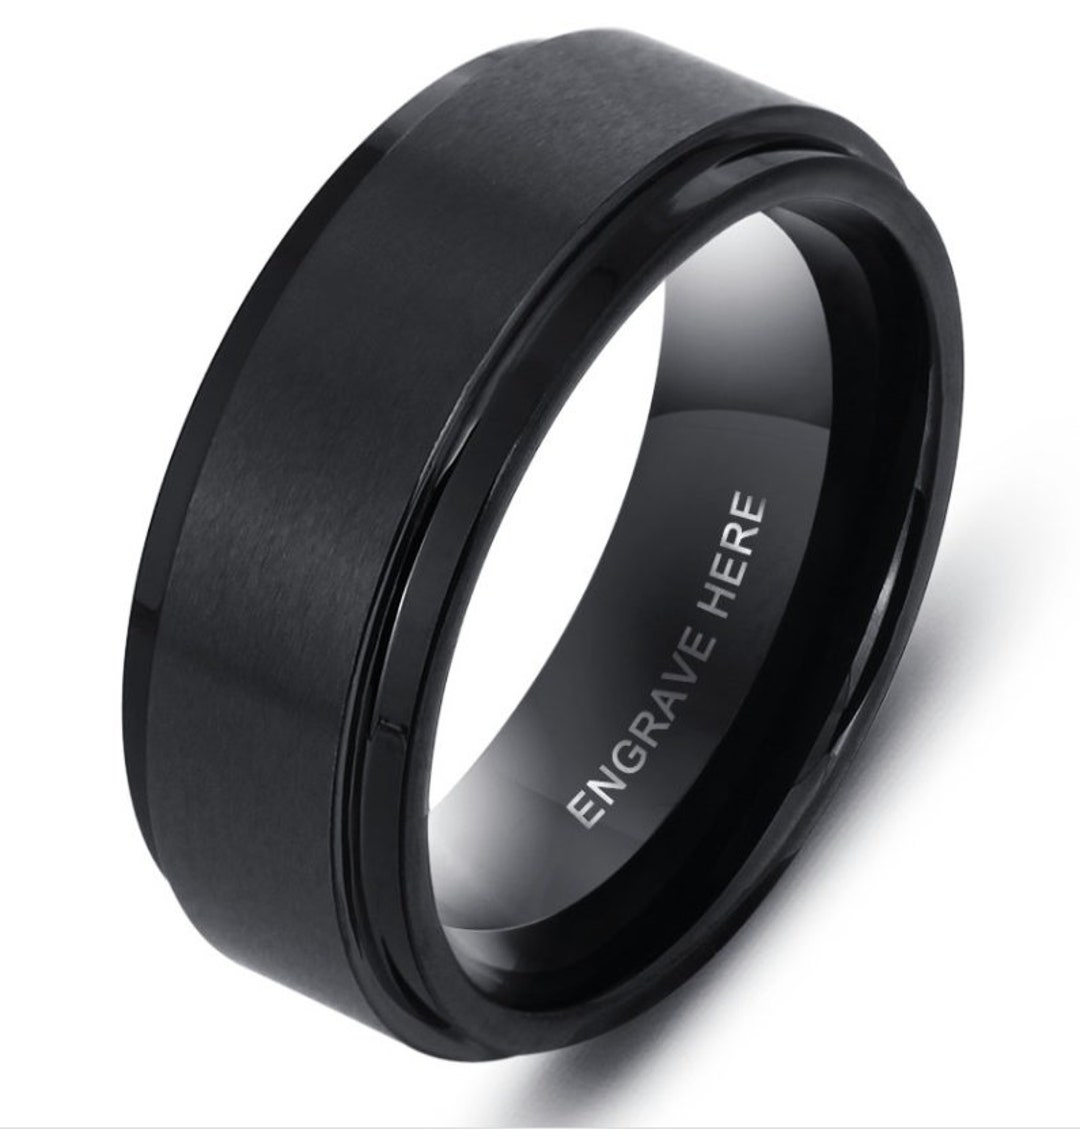 Personalized Engrave Name Rings for Men Black Stainless Steel - Etsy